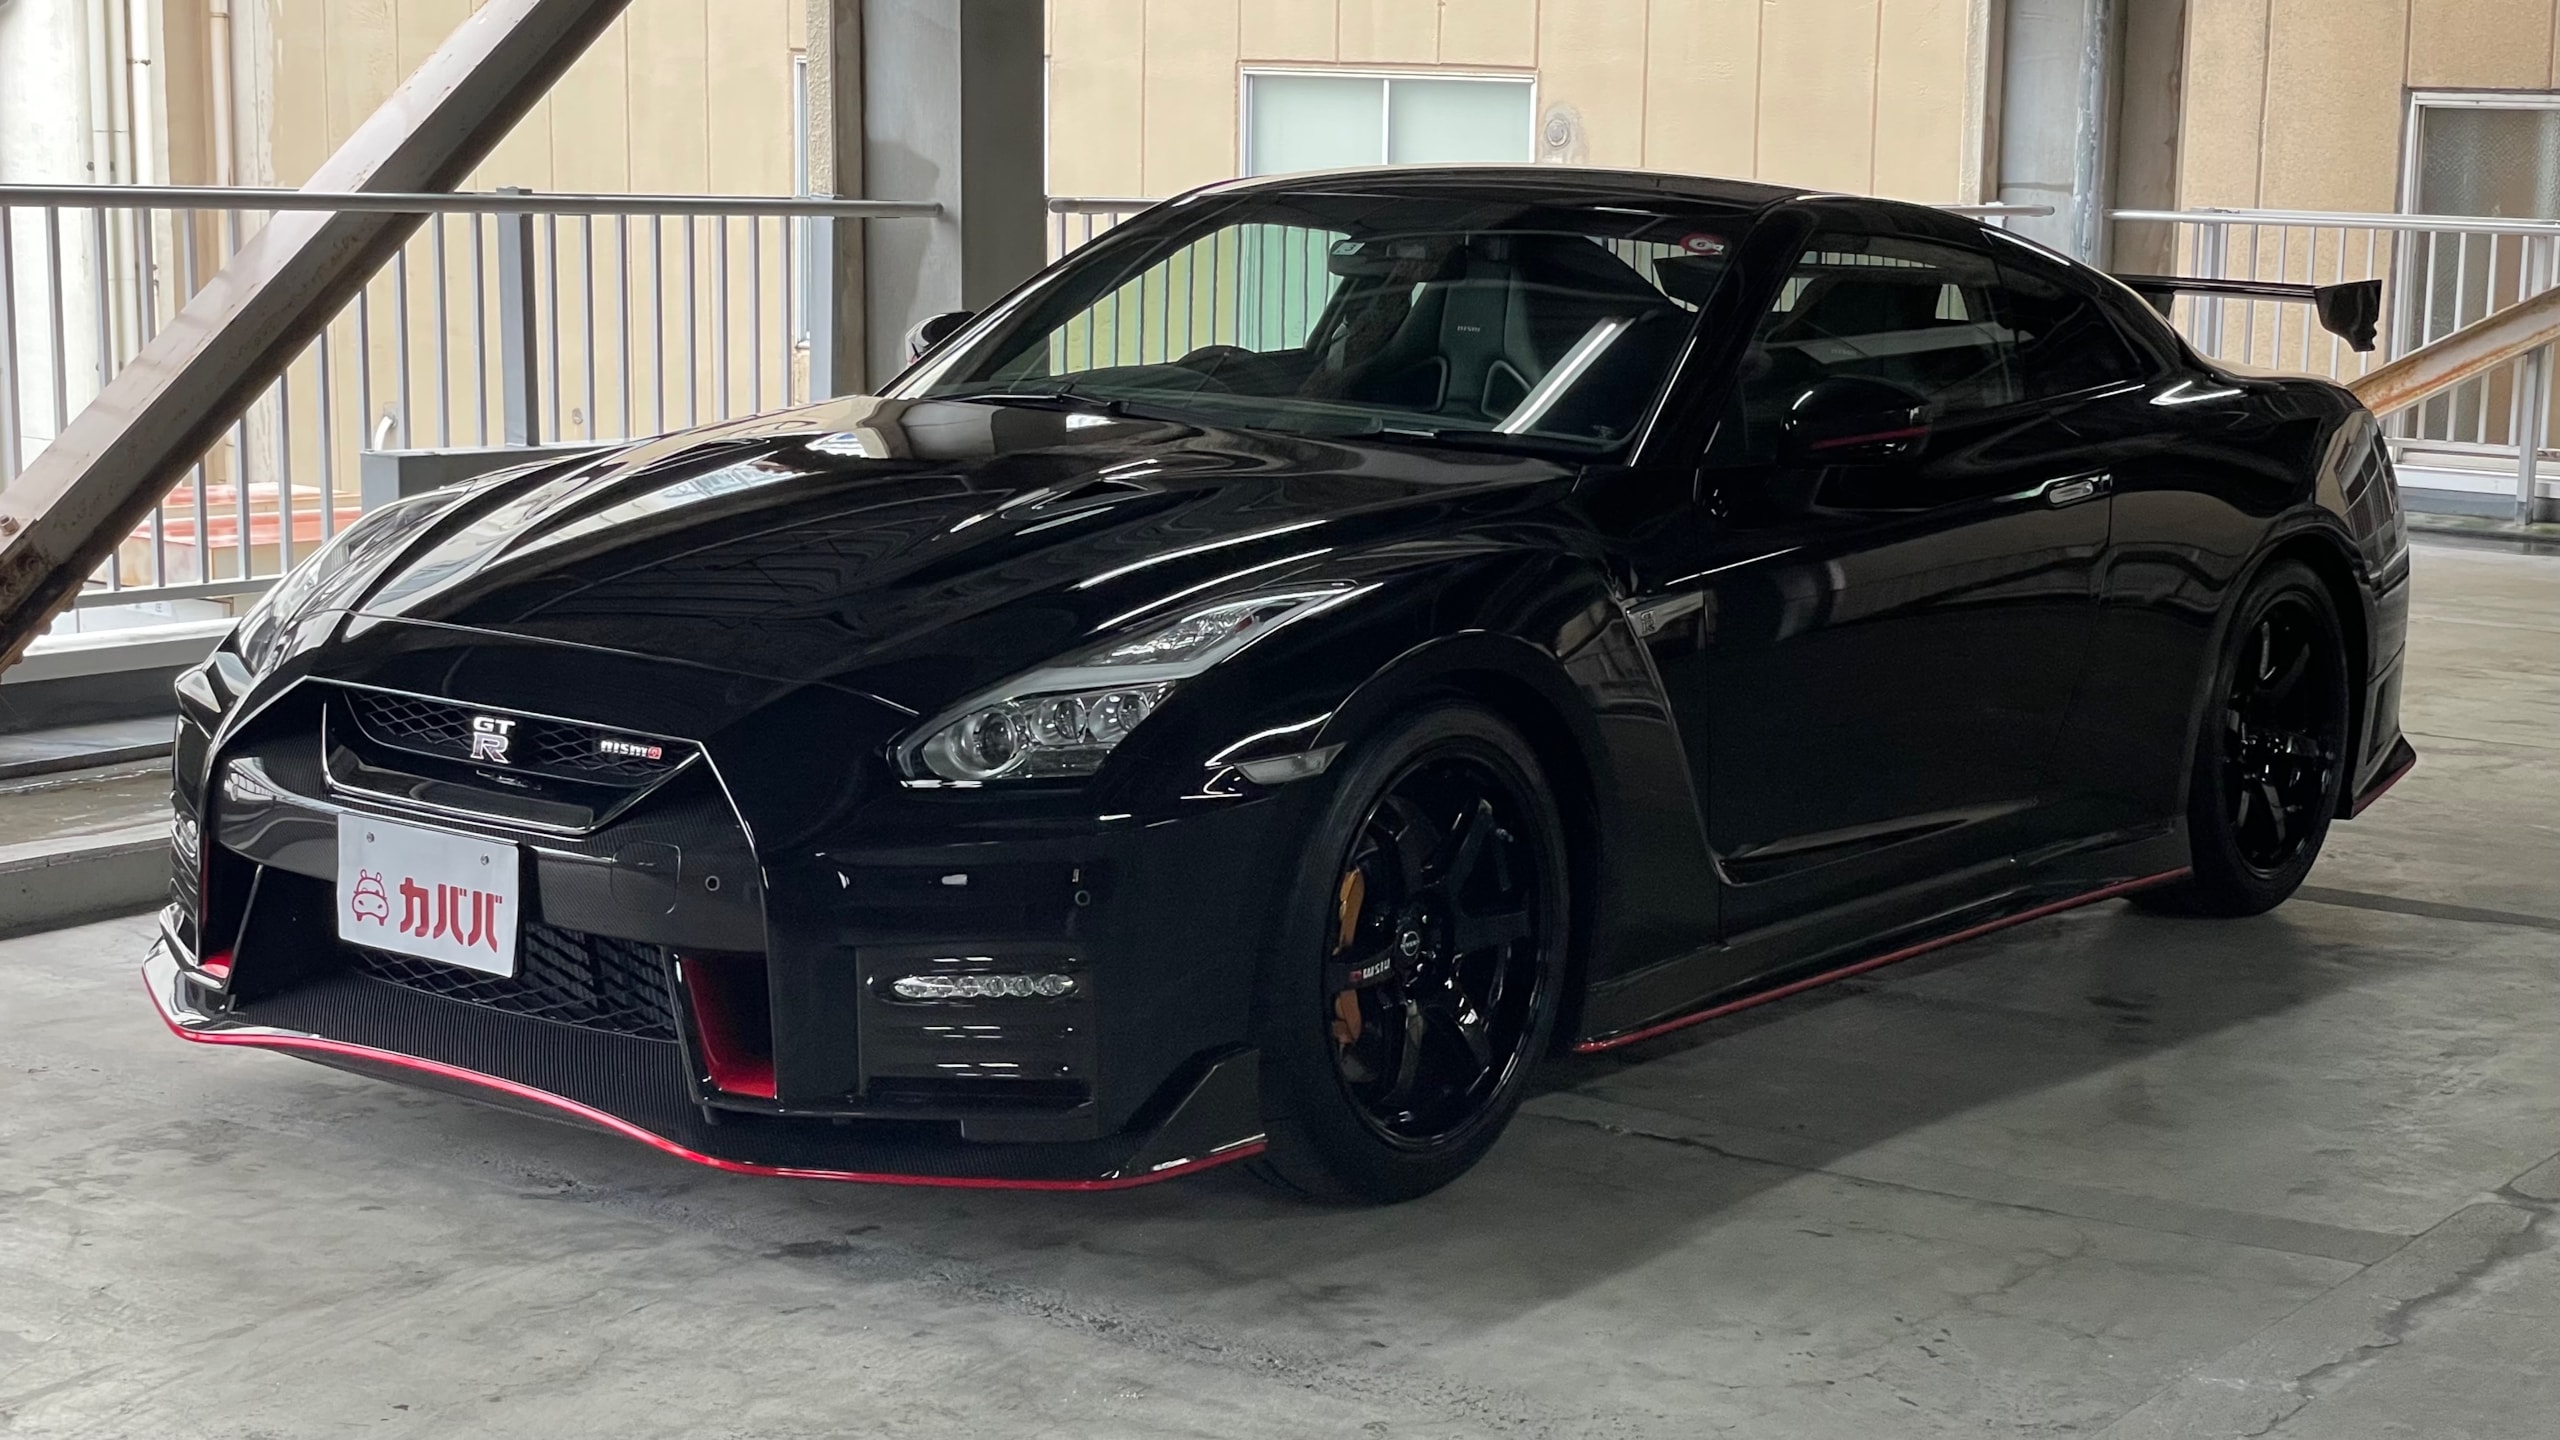 GT-R 3.8 NISMO 4WD(日産)2019年式 1930万円の中古車 - 自動車フリマ